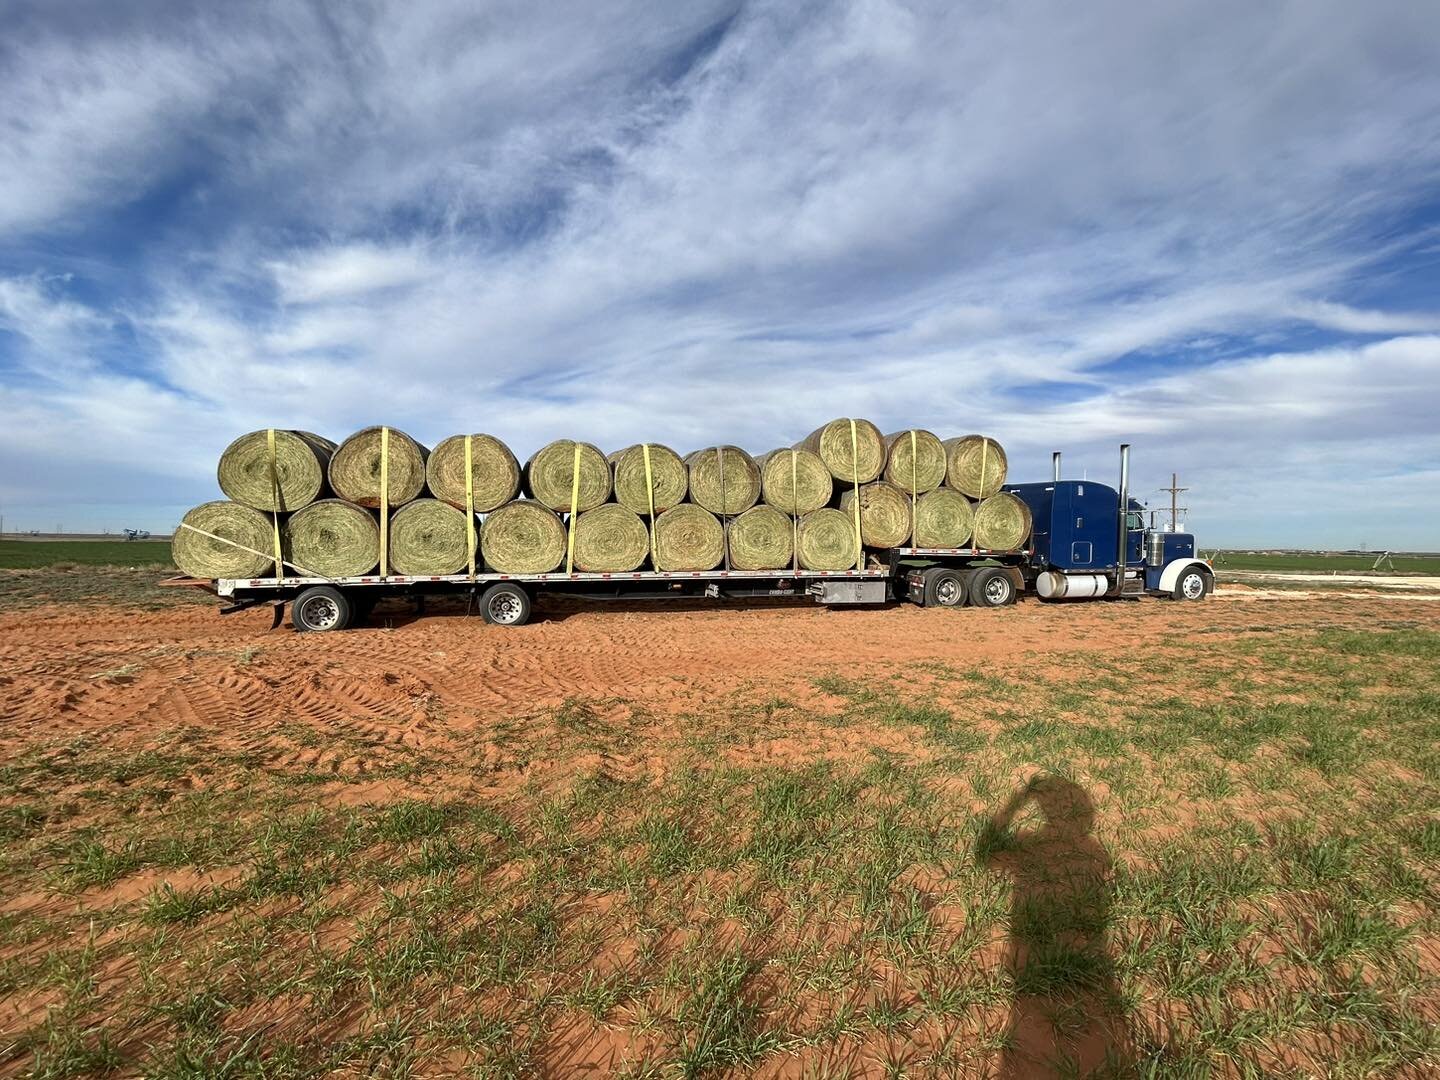 It never fails to amaze us how our horse community continuously shows up for one another. Over the weekend, 56 tons of alfalfa, 42 rolls of alfalfa, 125 grass rolls, and 500 square bales were delivered and routed to our neighbors in the Panhandle of 